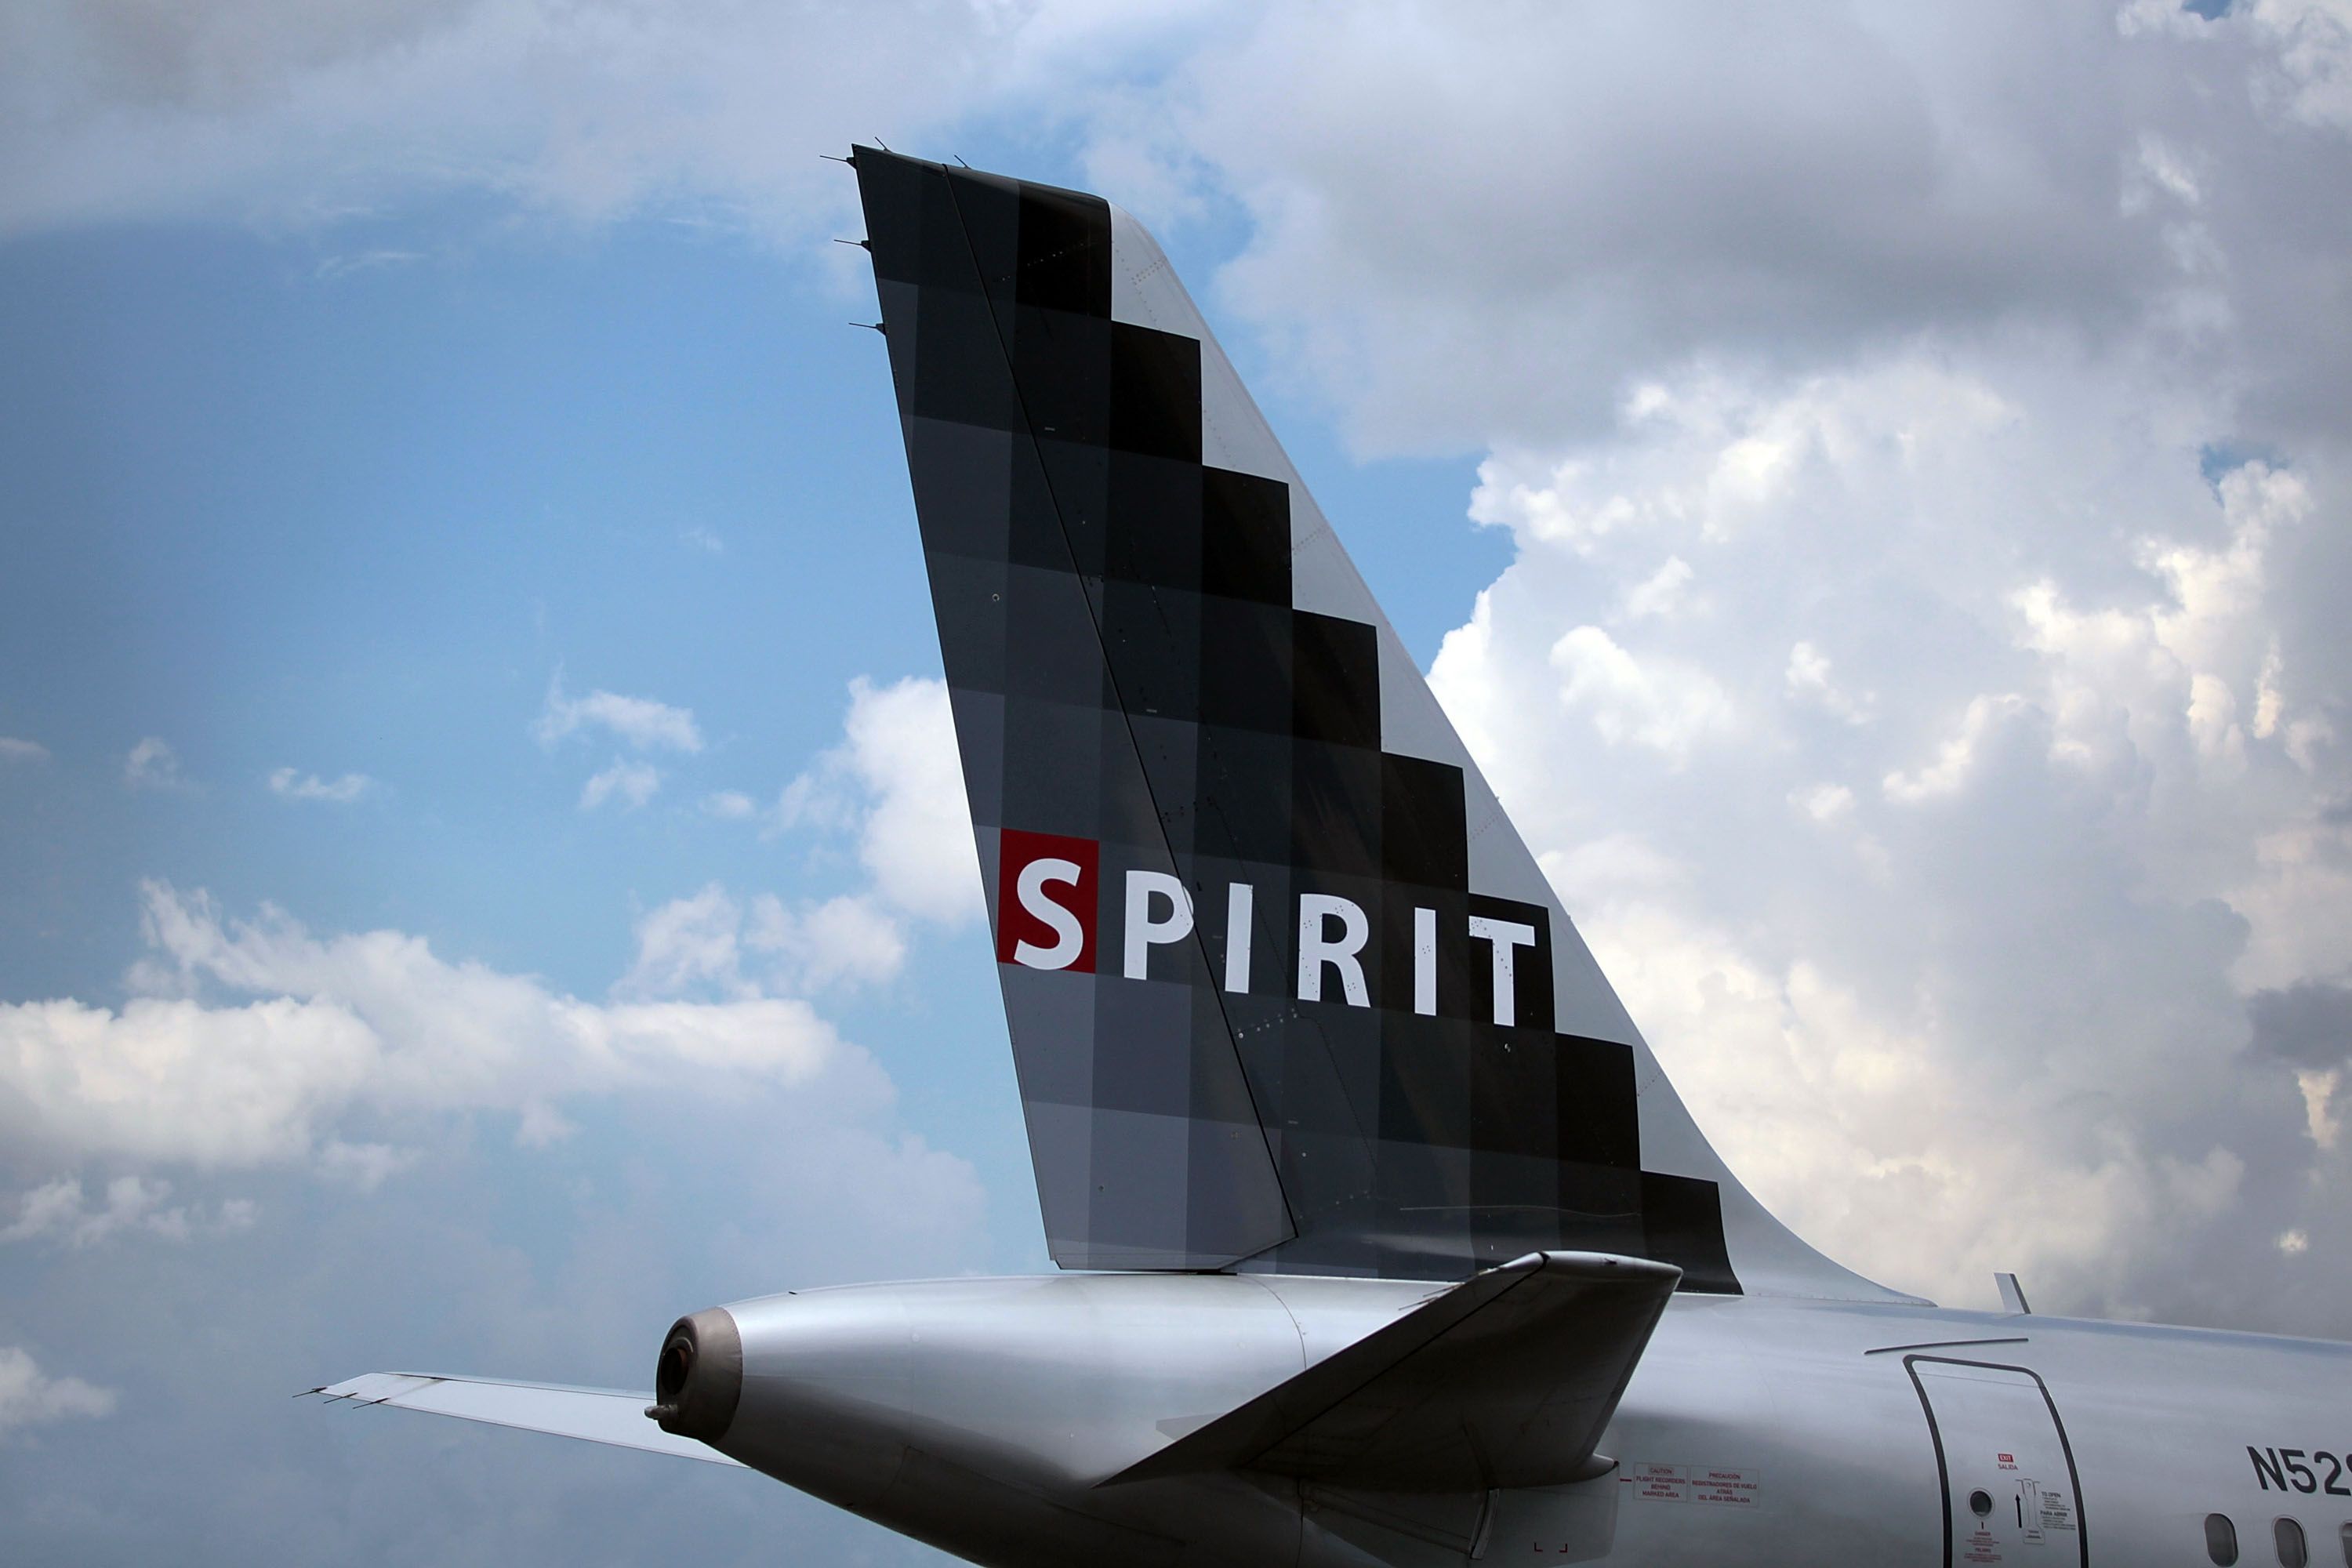 GettyImages-102173992 Spirit Old Livery